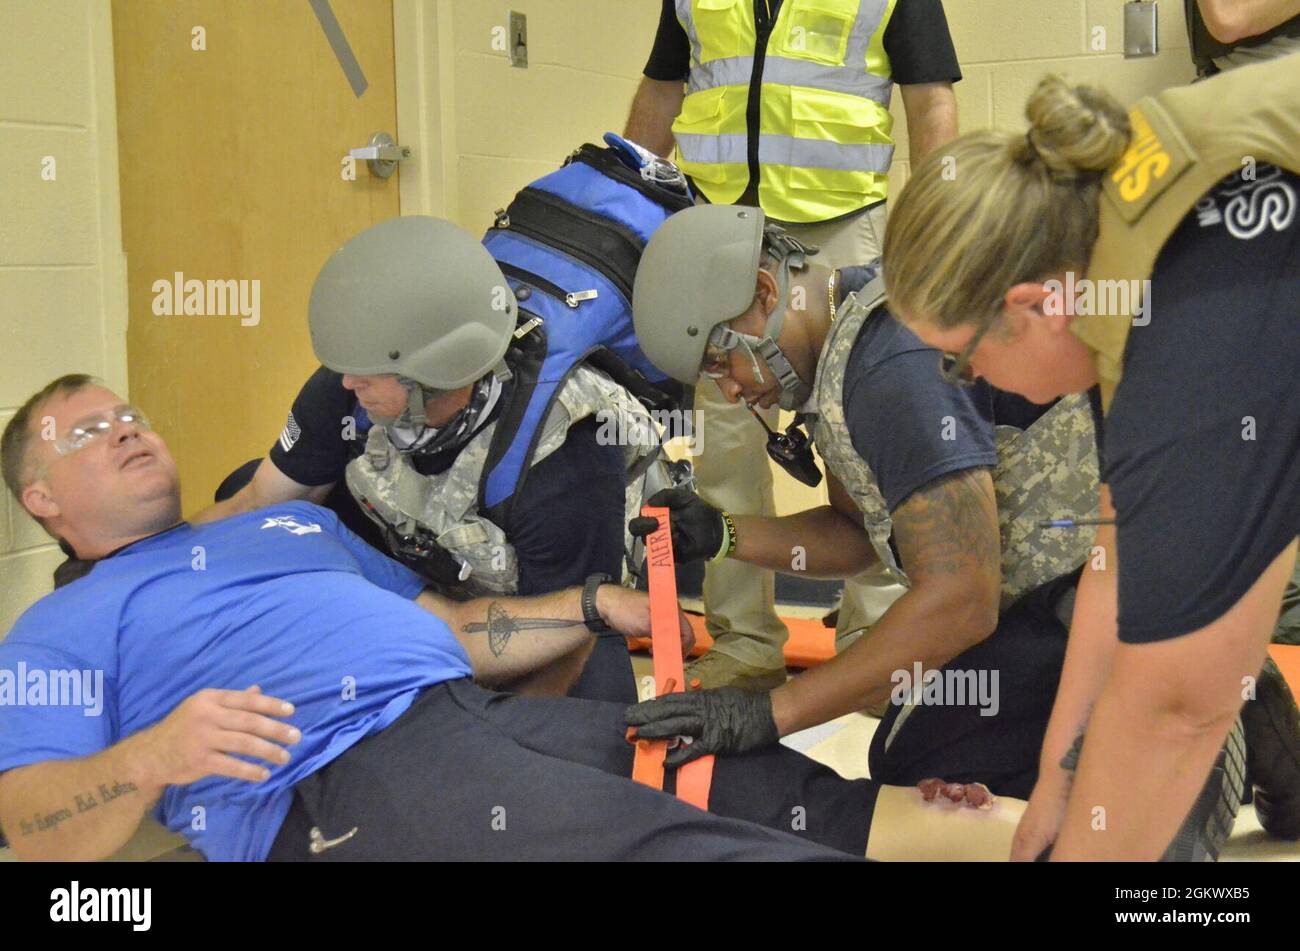 Donny Plaster, assistant chief of training, Fort Campbell Fire and Emergency Services, left, works with Wes LaFortune, district chief, Fort Campbell Fire and Emergency Services, center, and Sgt. Thomasa Munroe, Montgomery County Sheriff’s Office, to prepare a shooting victim for medical evacuation during Active Attack Integrated Response training, hosted July 12-16 at Jackson Elementary School. Stock Photo